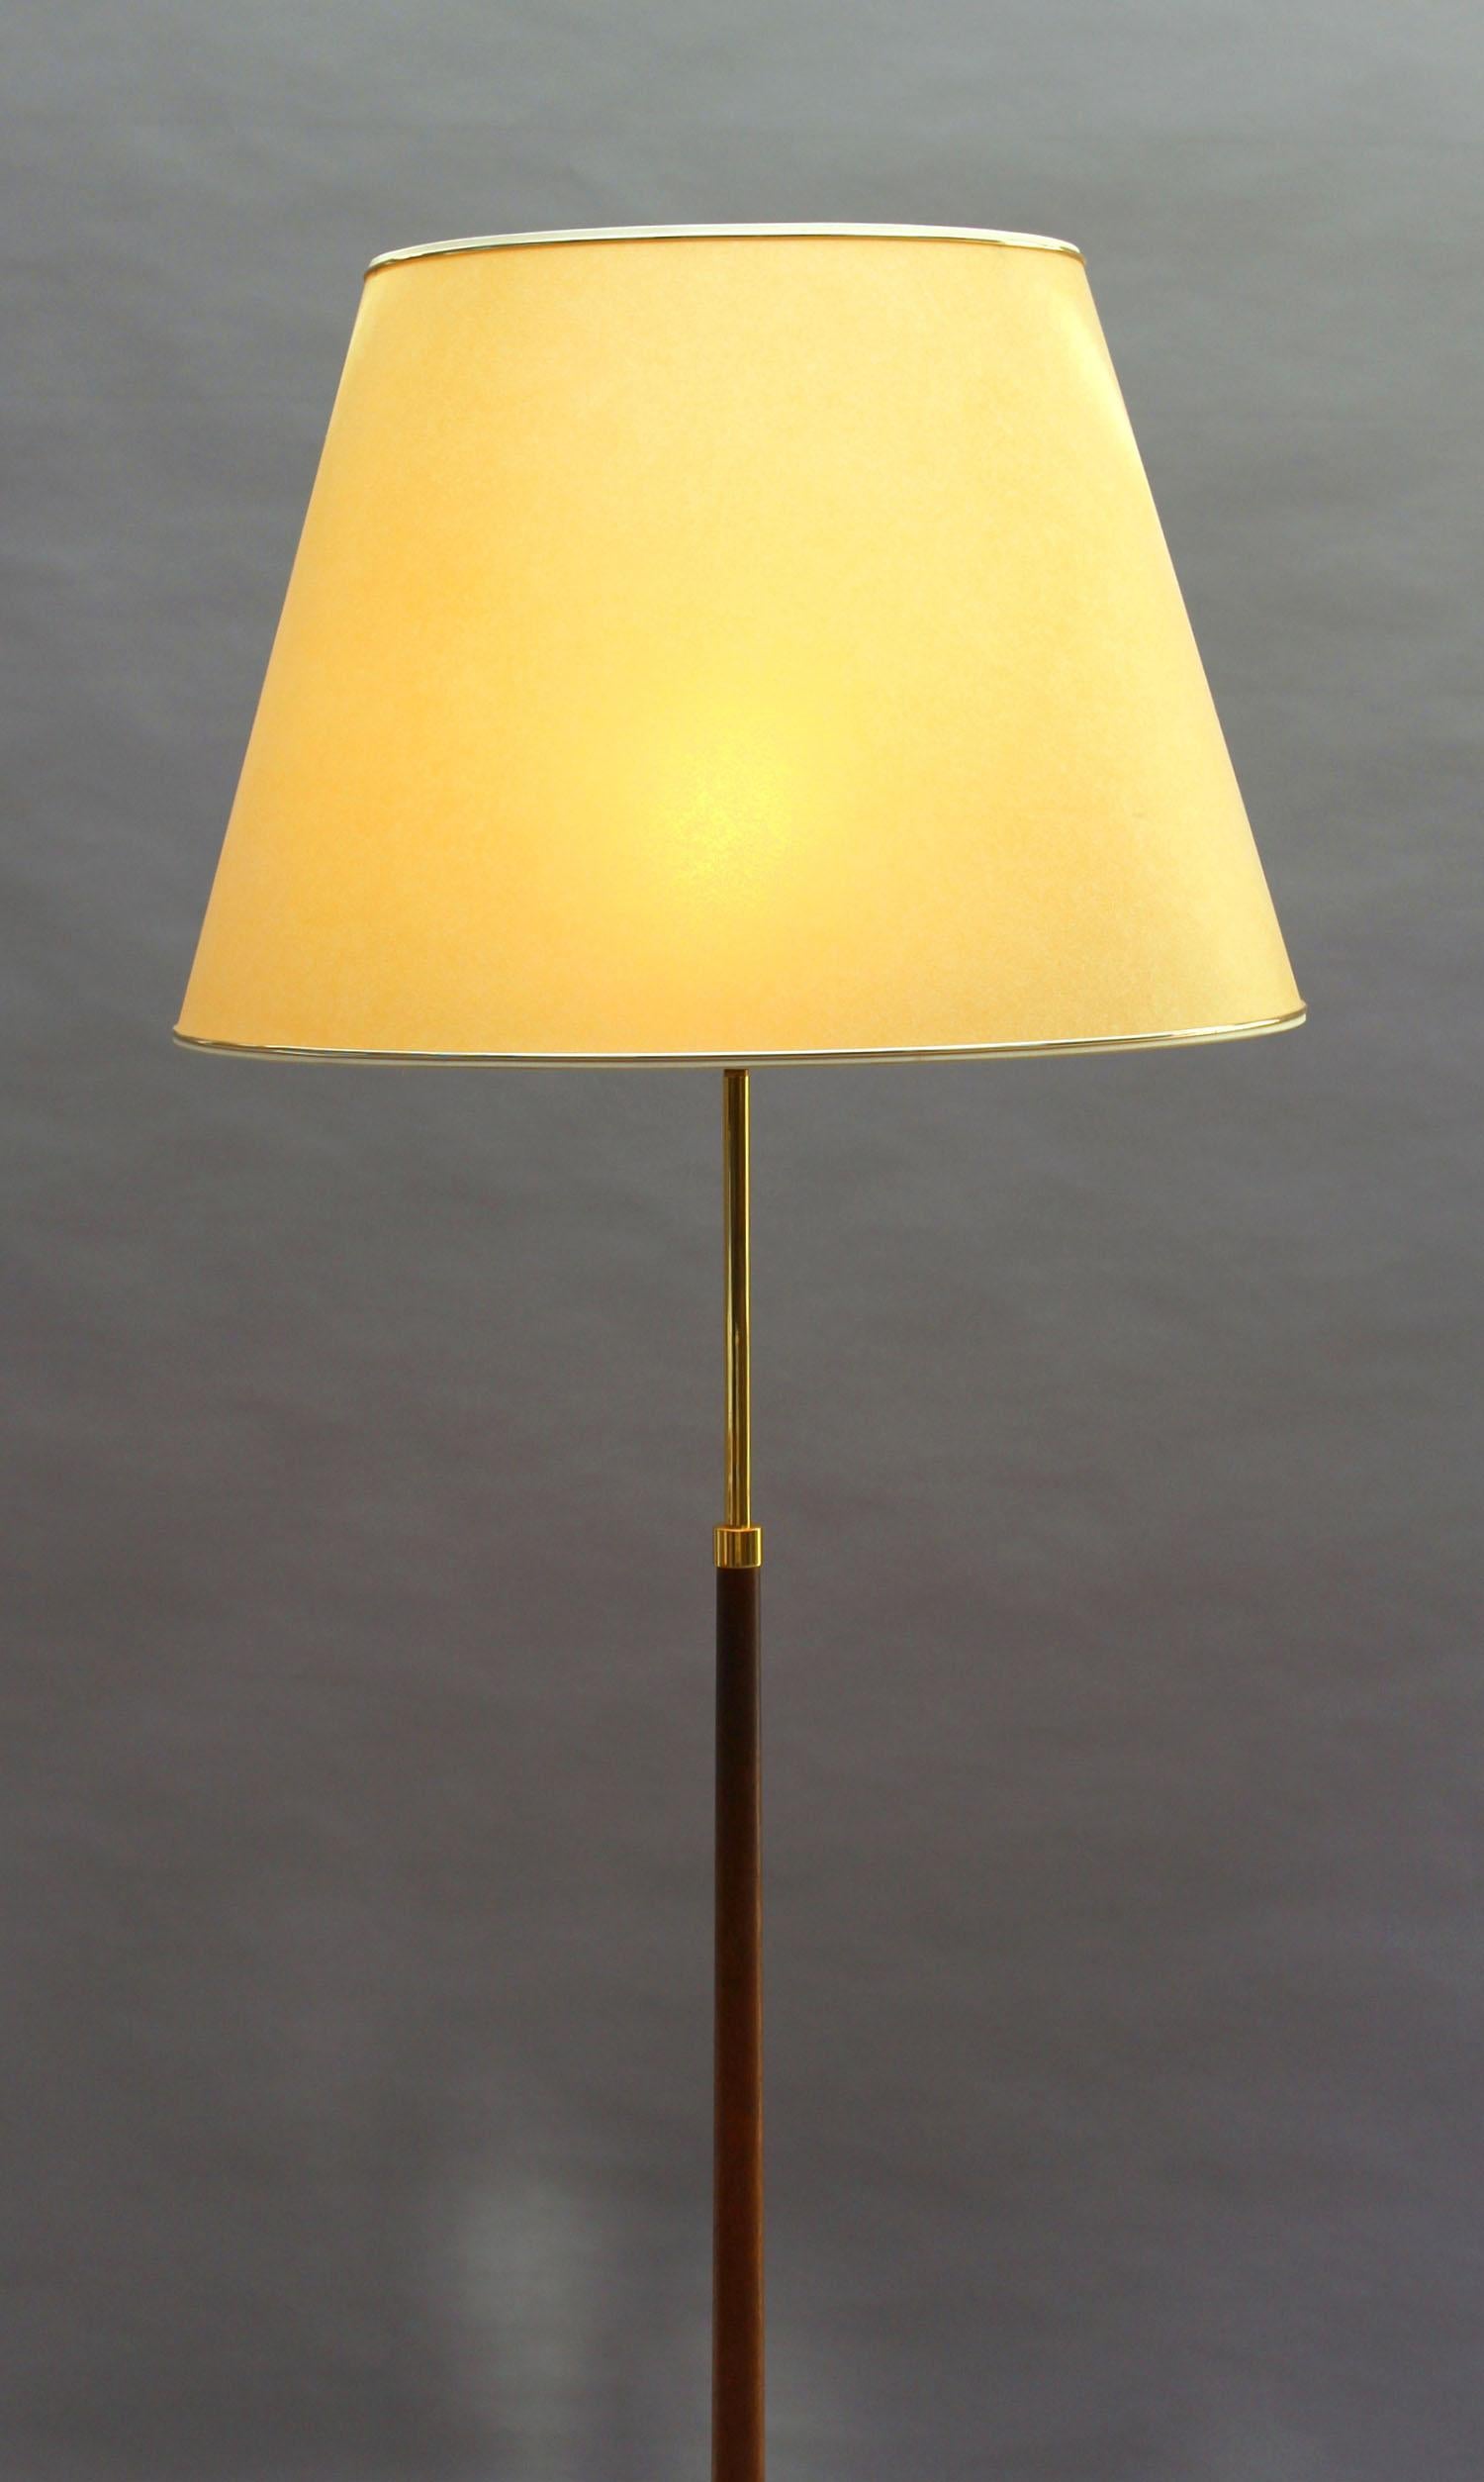 Fine 1960s Danish Floor Lamp by Th. Valentiner In Good Condition For Sale In Long Island City, NY